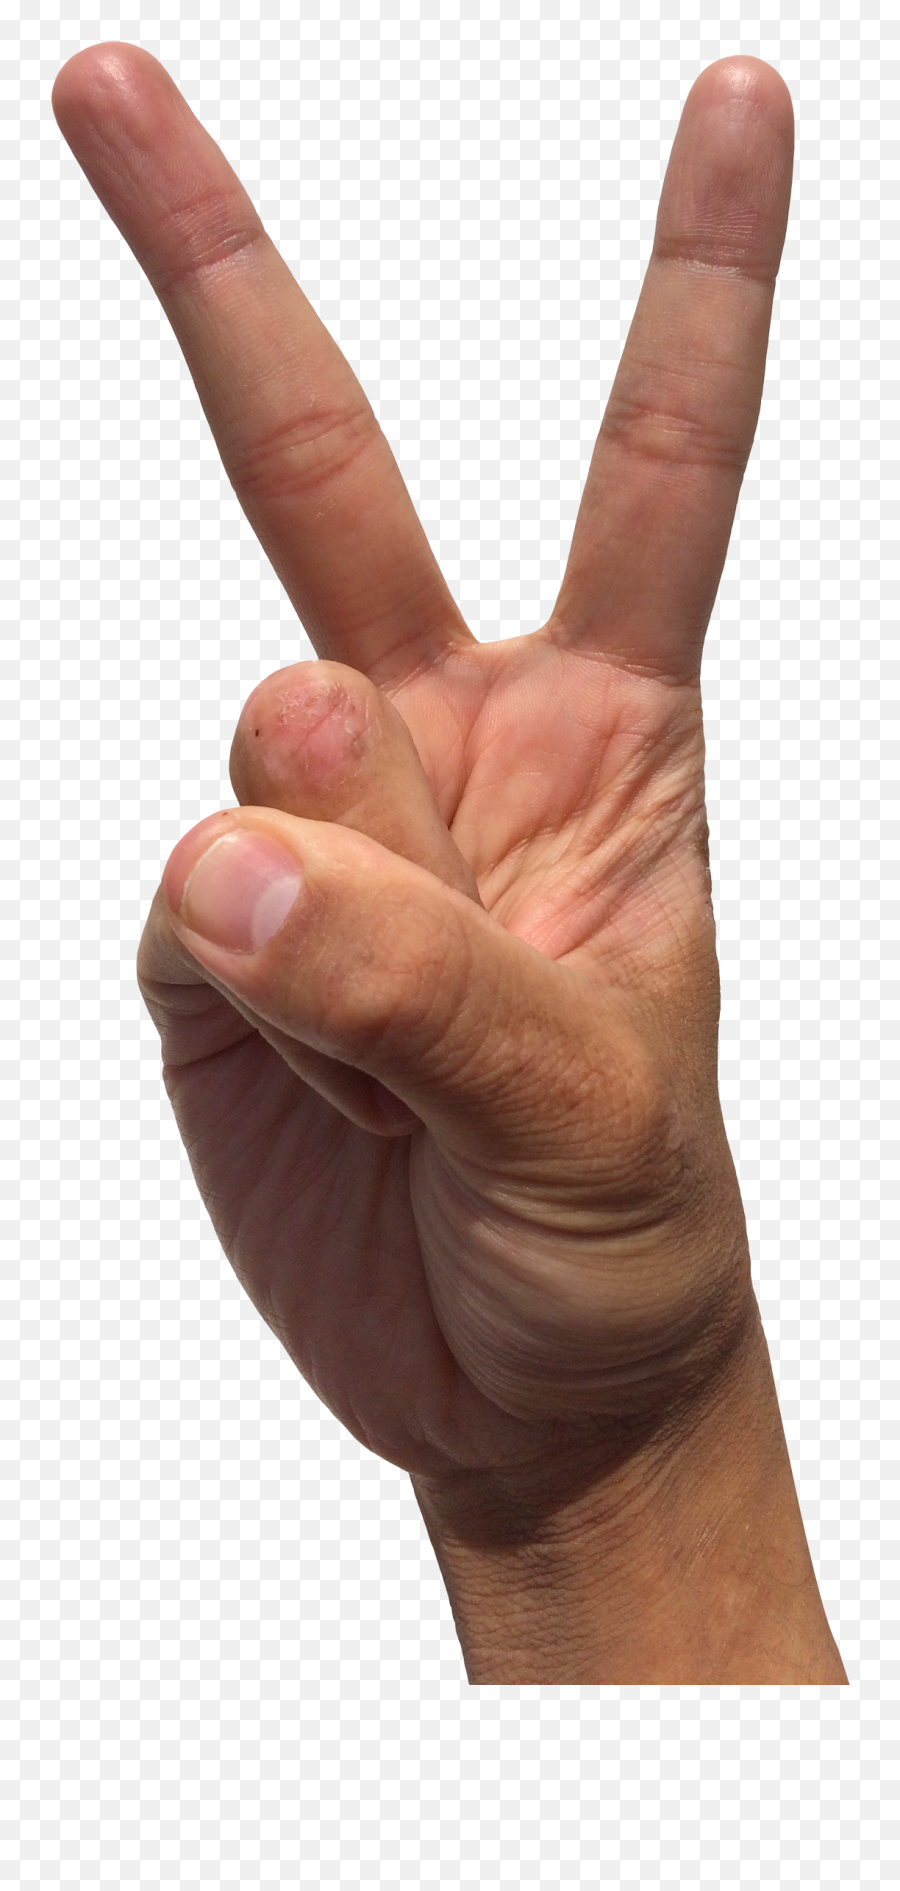 Mobile Phone In Hand Png Image - Pngpix Peace Sign Hand Png,Phone In Hand Png